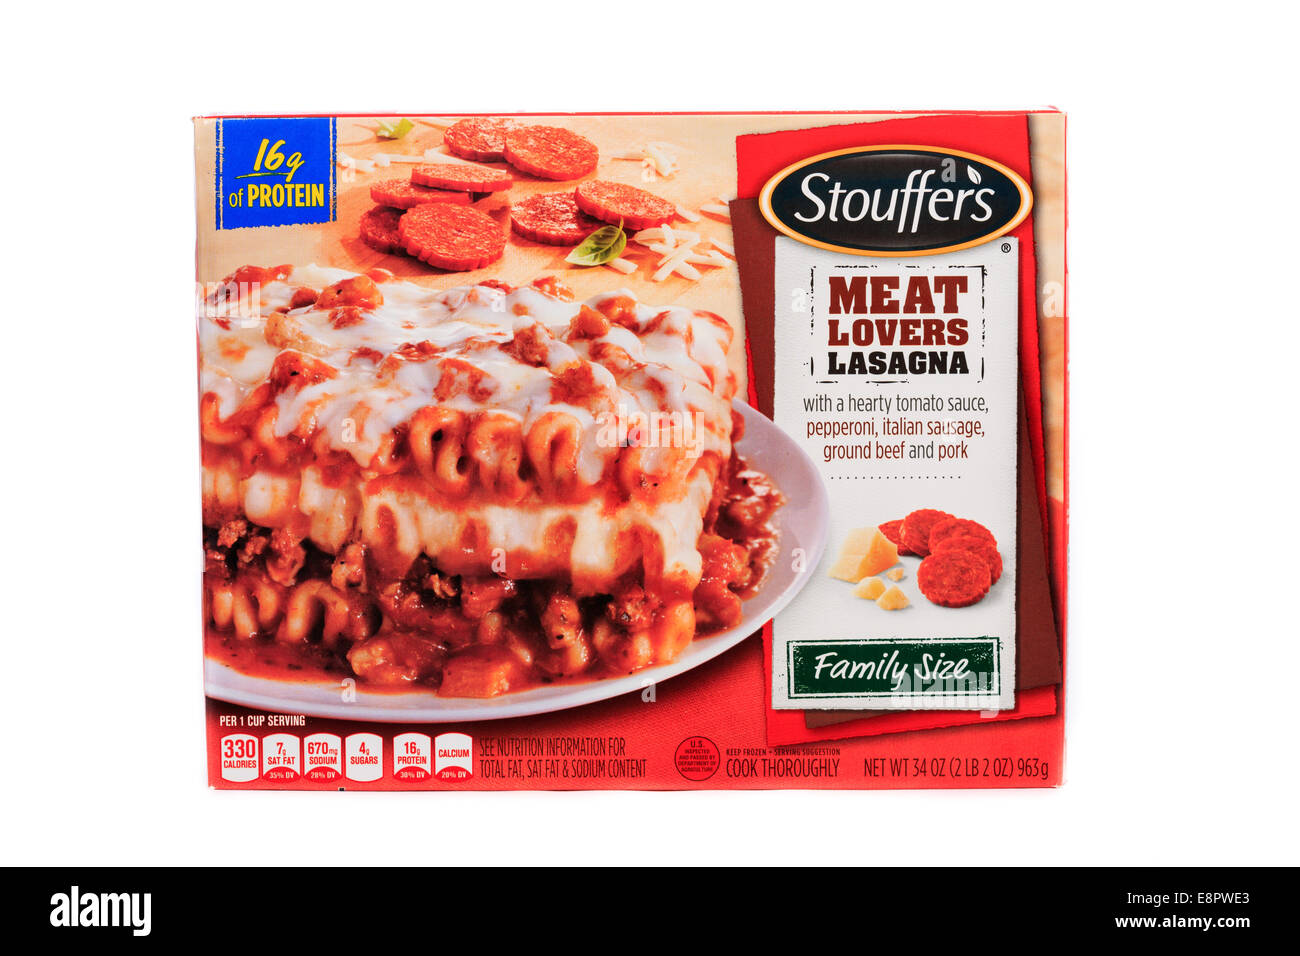 Nestle Brand Stouffer's Meat Lovers Lasagna family sized ready meal frozen prepared Stock Photo